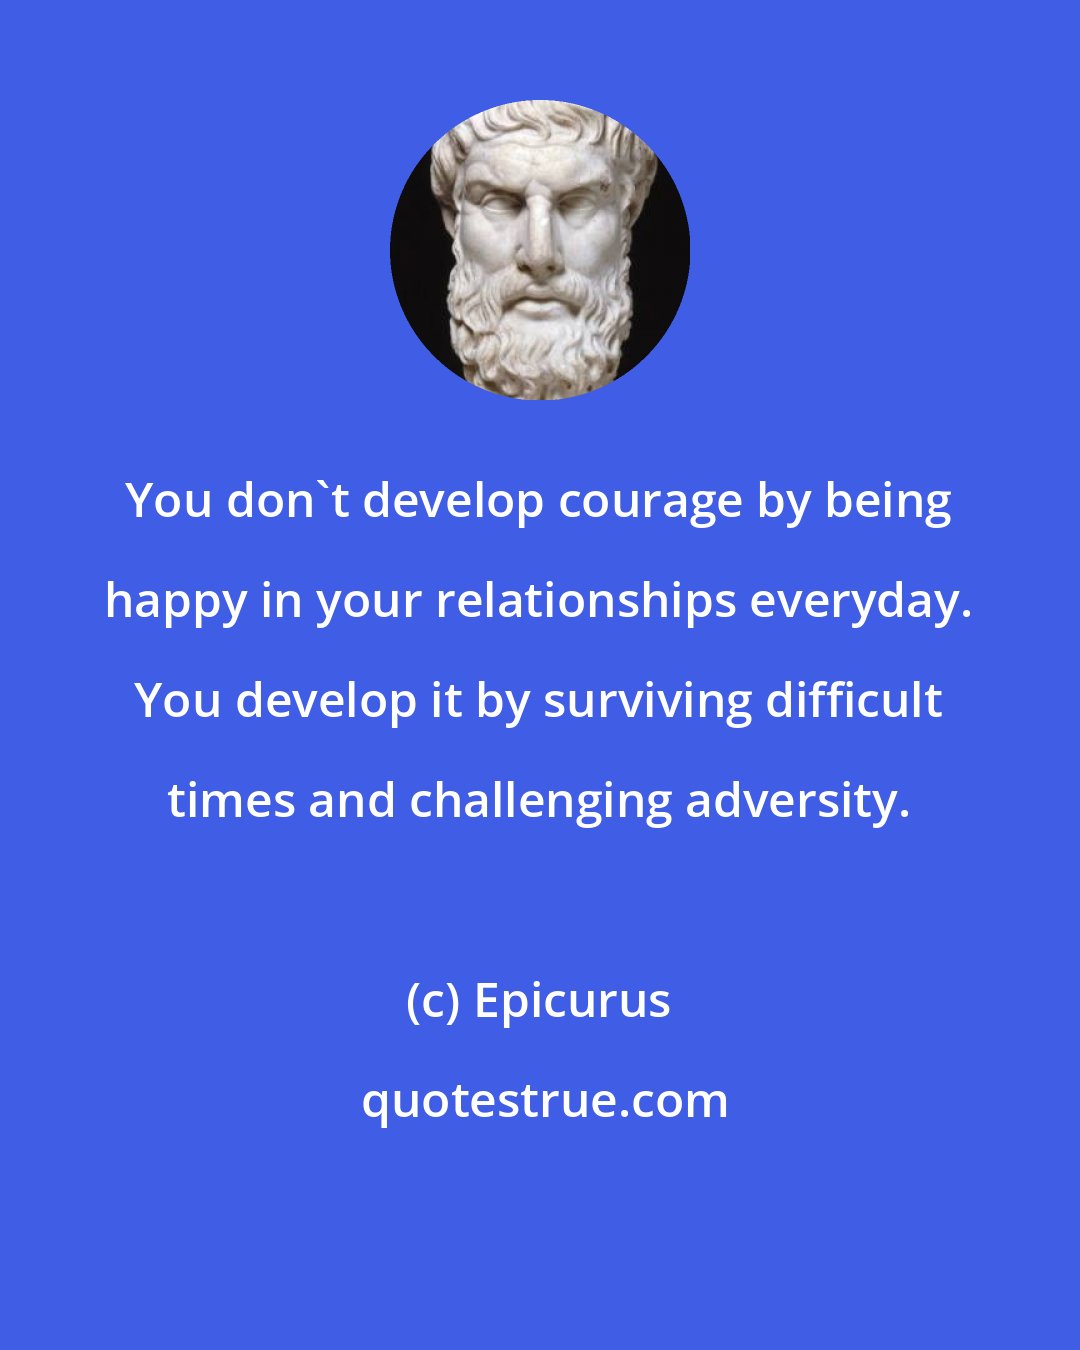 Epicurus: You don't develop courage by being happy in your relationships everyday. You develop it by surviving difficult times and challenging adversity.